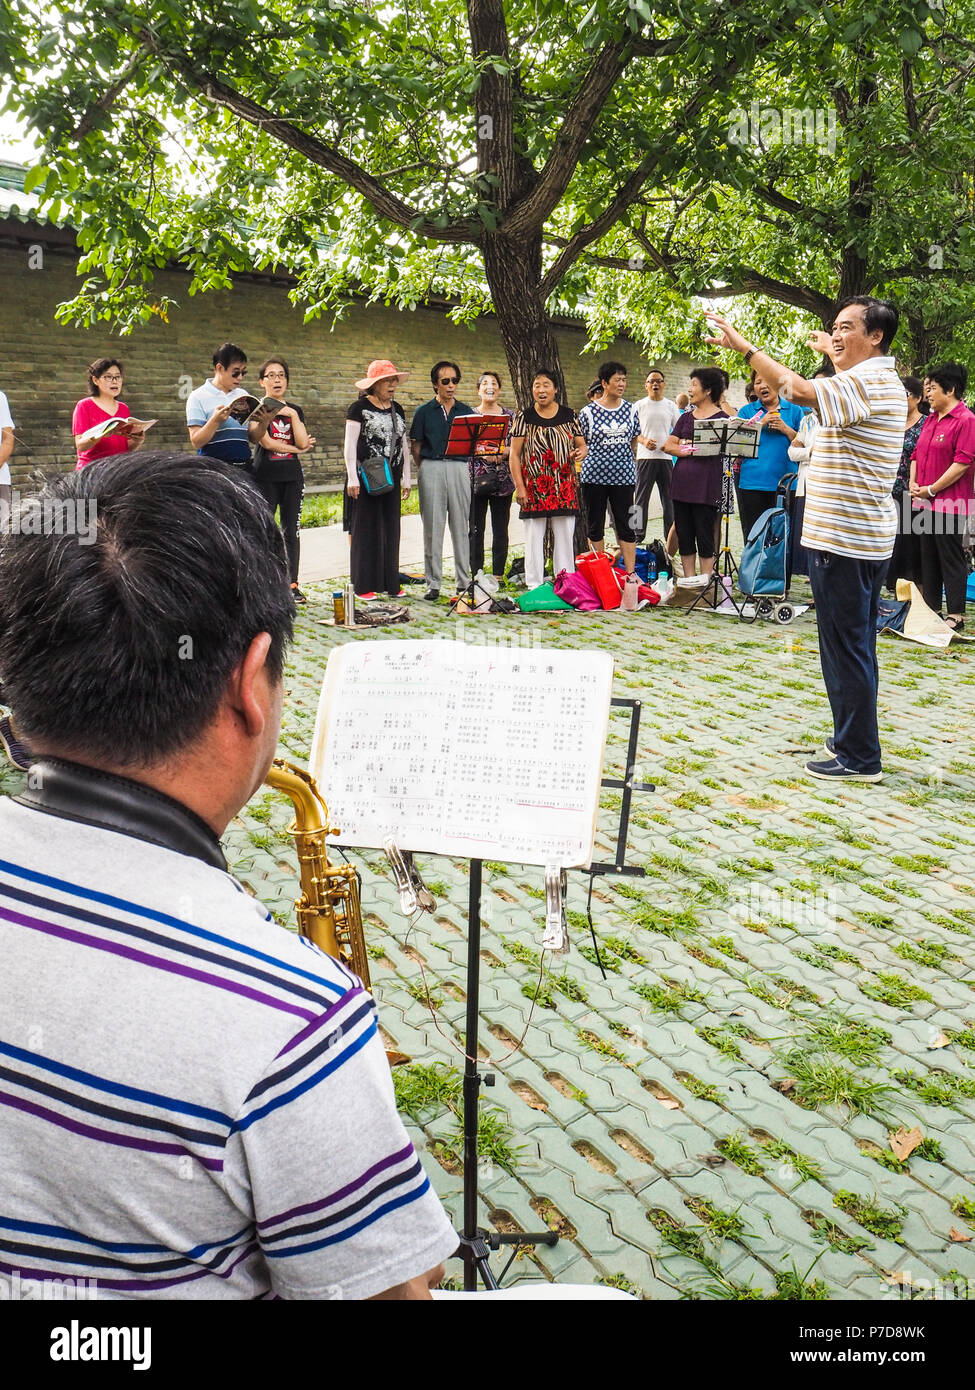 Beijing, China - September 2017: group of middle aged and retired people singing together in the park of the Temple of Heaven on a Sunday afternoon Stock Photo